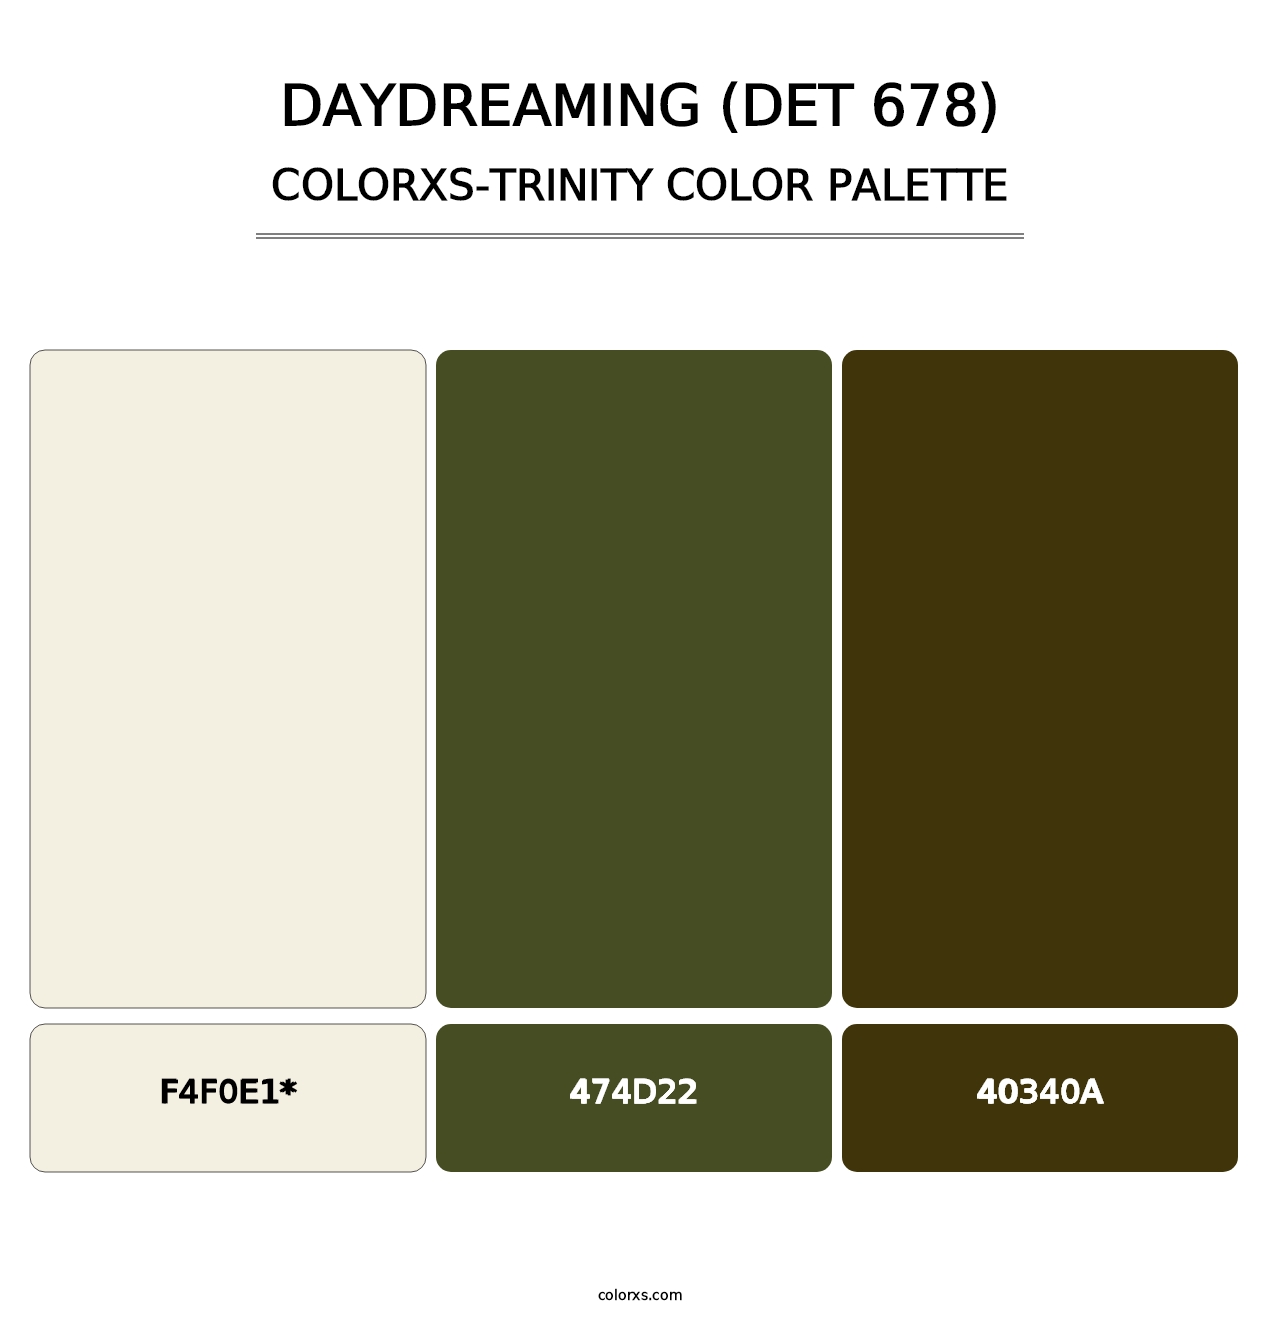 Daydreaming (DET 678) - Colorxs Trinity Palette